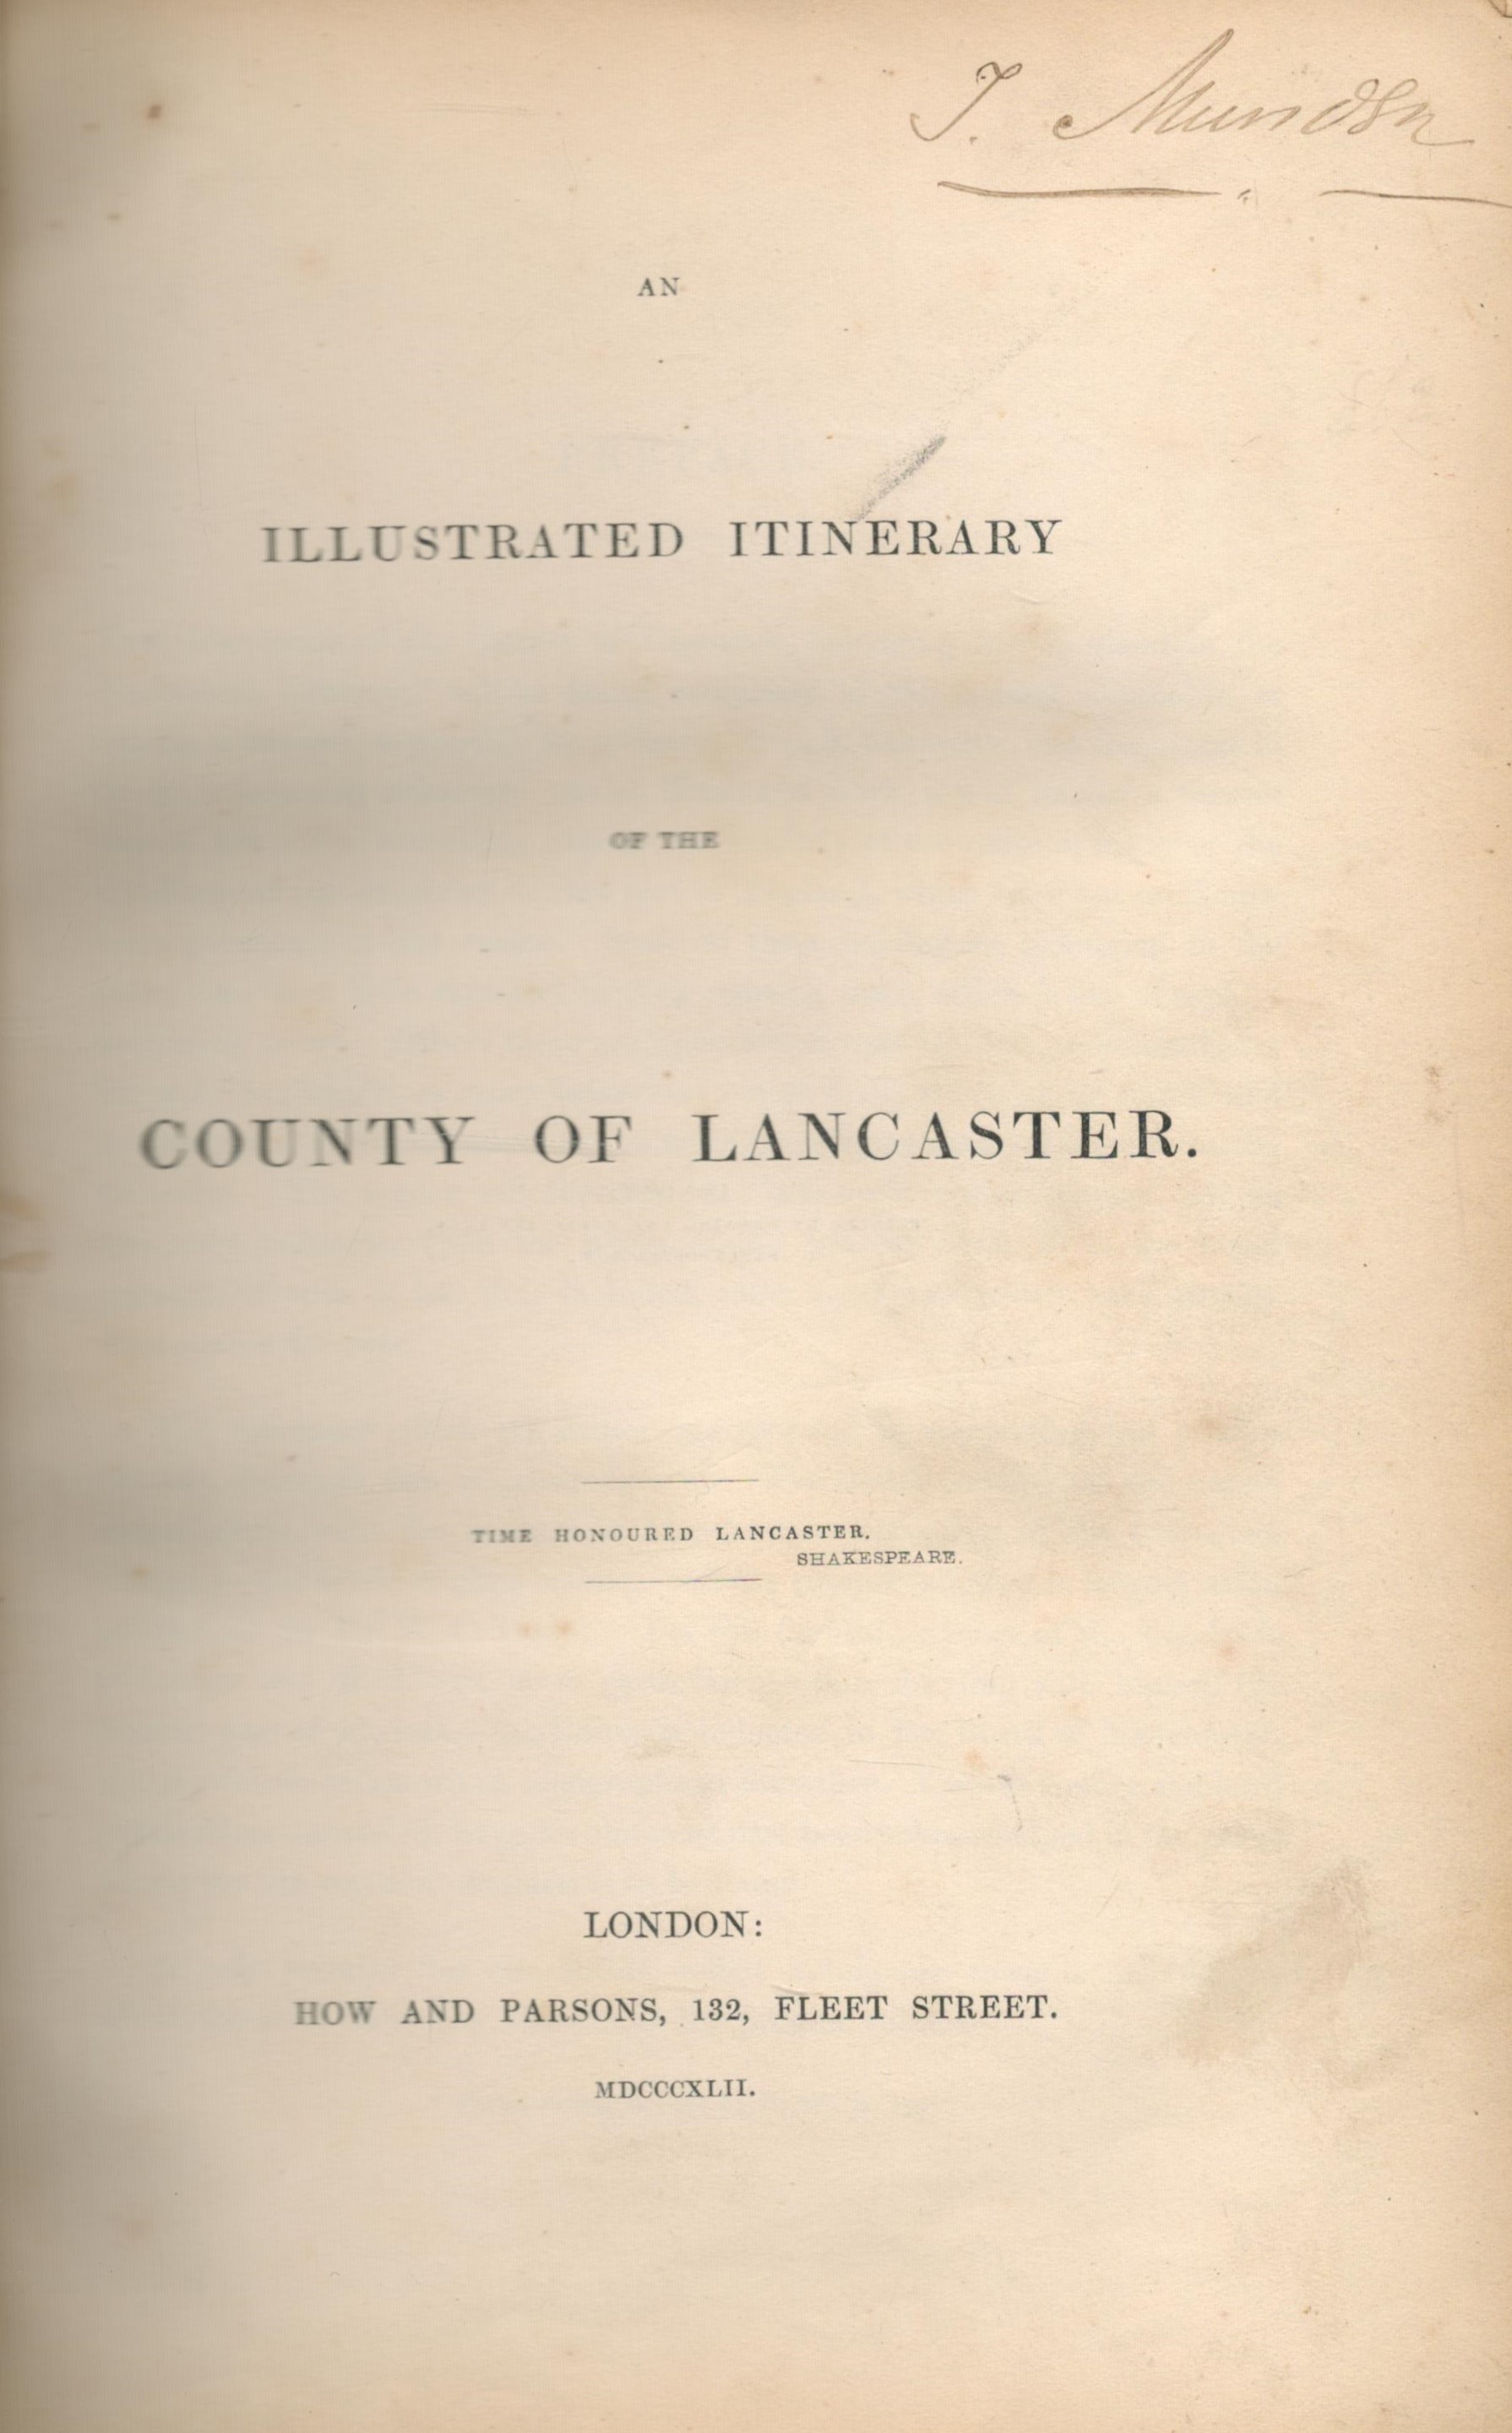 An Illustrated Itinerary of the County of Lancaster. Time honoured Lancaster - Shakespeare. - Image 2 of 2